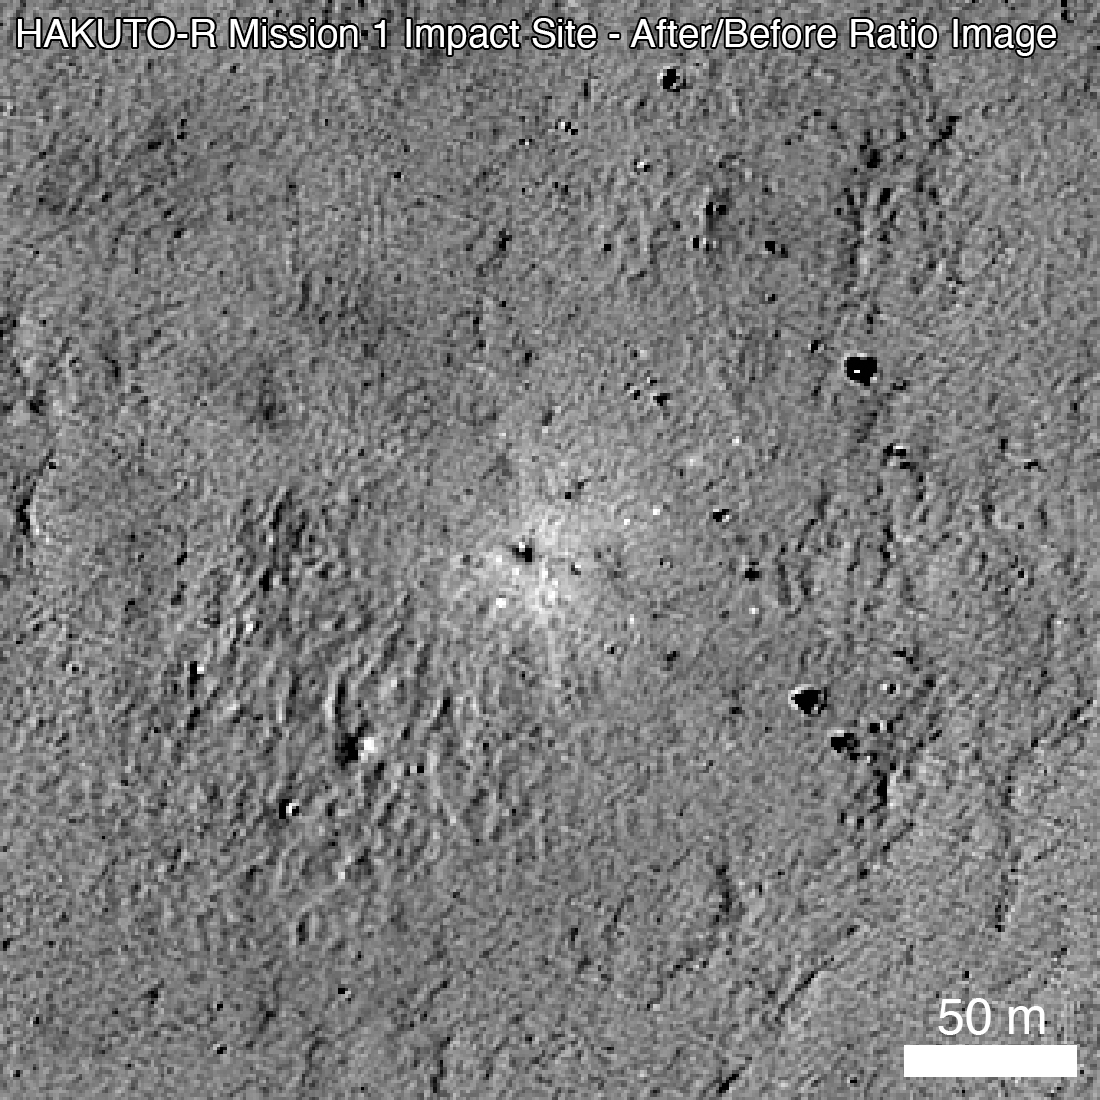 Ratio image of the impact site